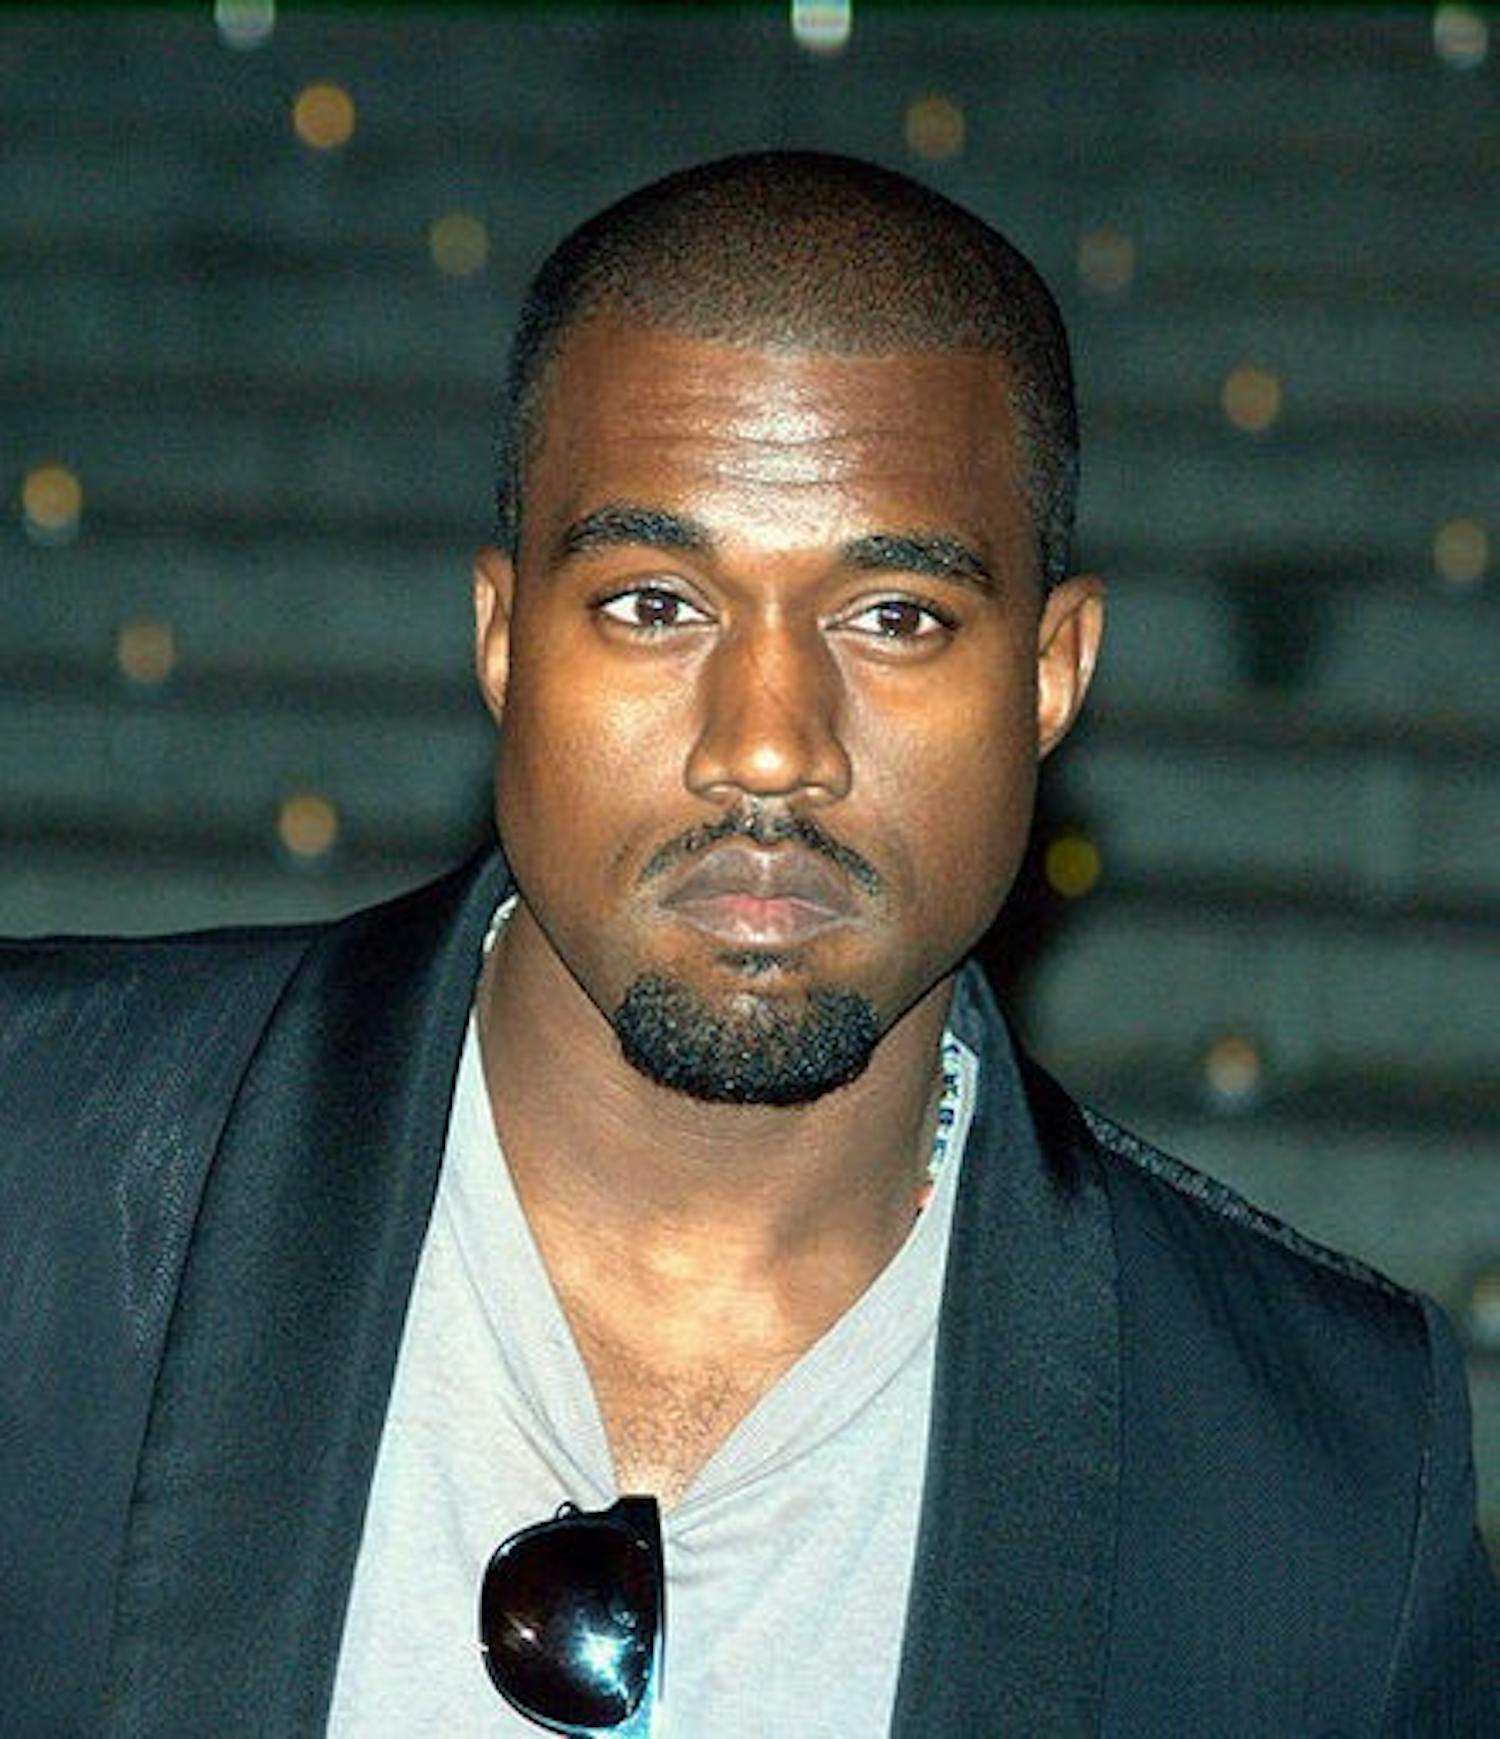 Kanye West's gaff at the Video Music Awards may prove that there is no such thing as bad press.